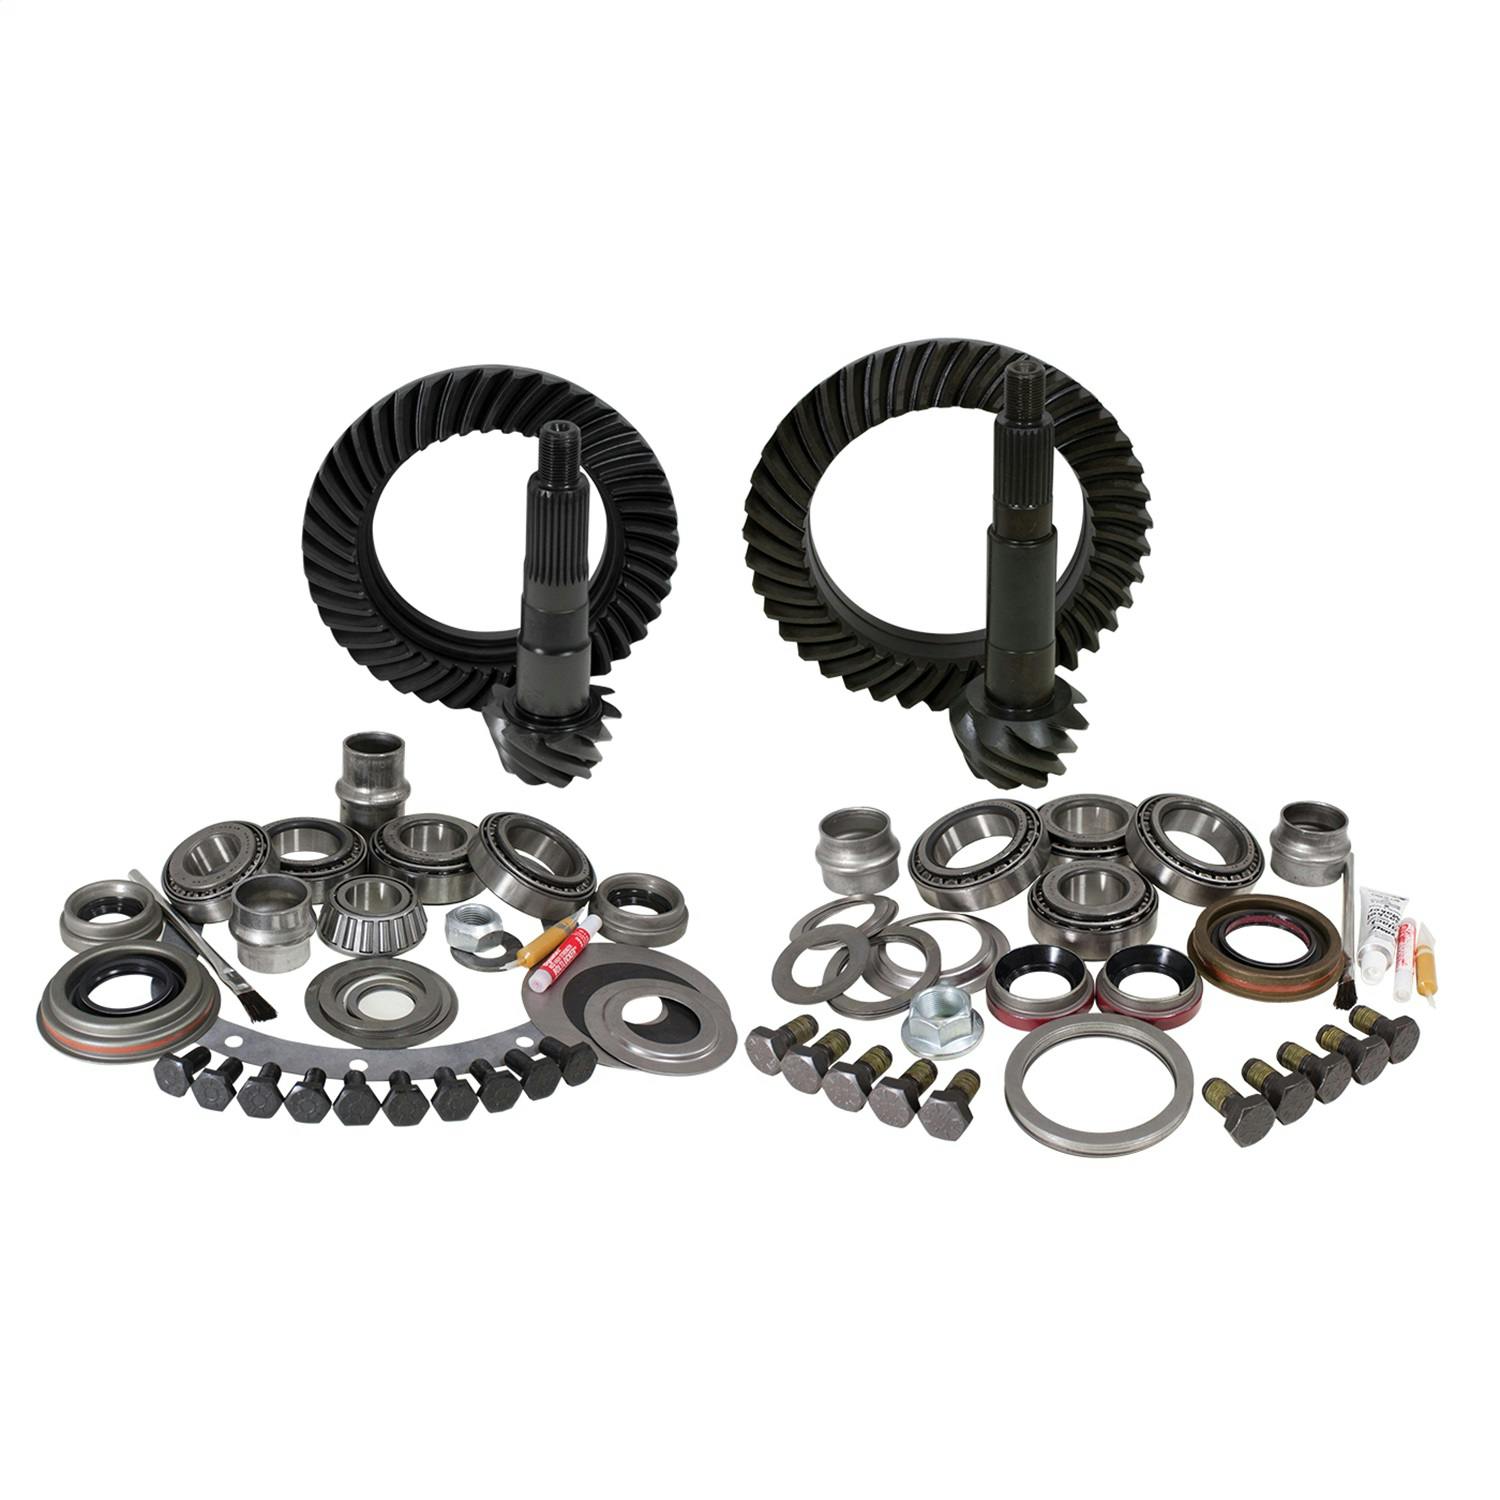 USA Standard Gear ZGK003 Ring And Pinion Set And Complete Install Kit